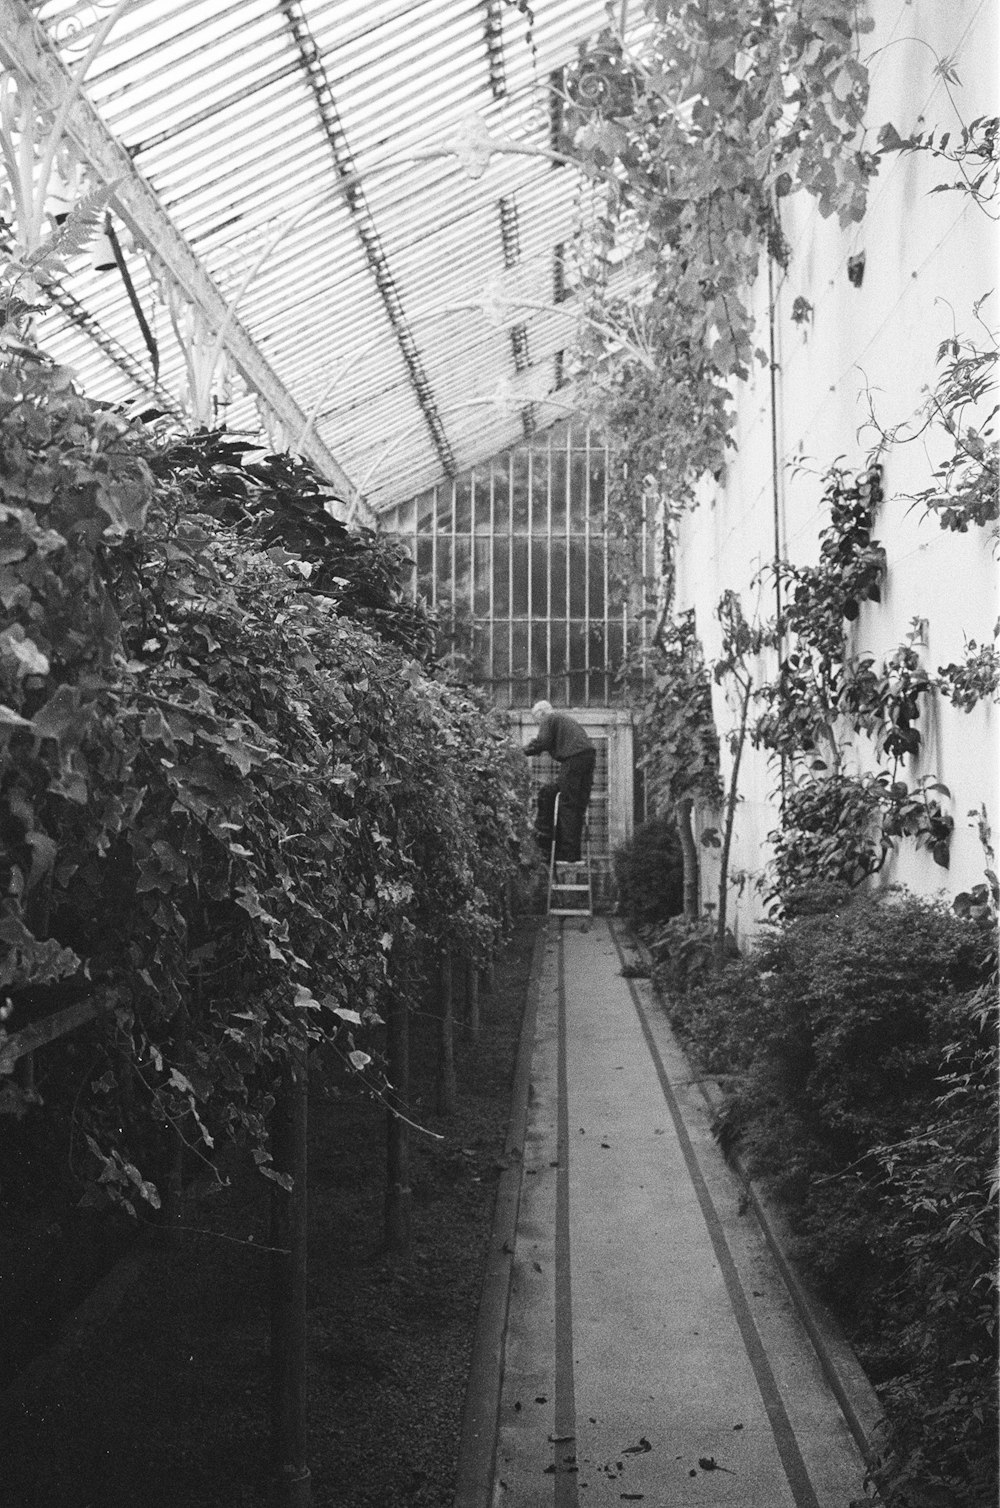 grayscale photo of person walking on pathway surrounded by plants